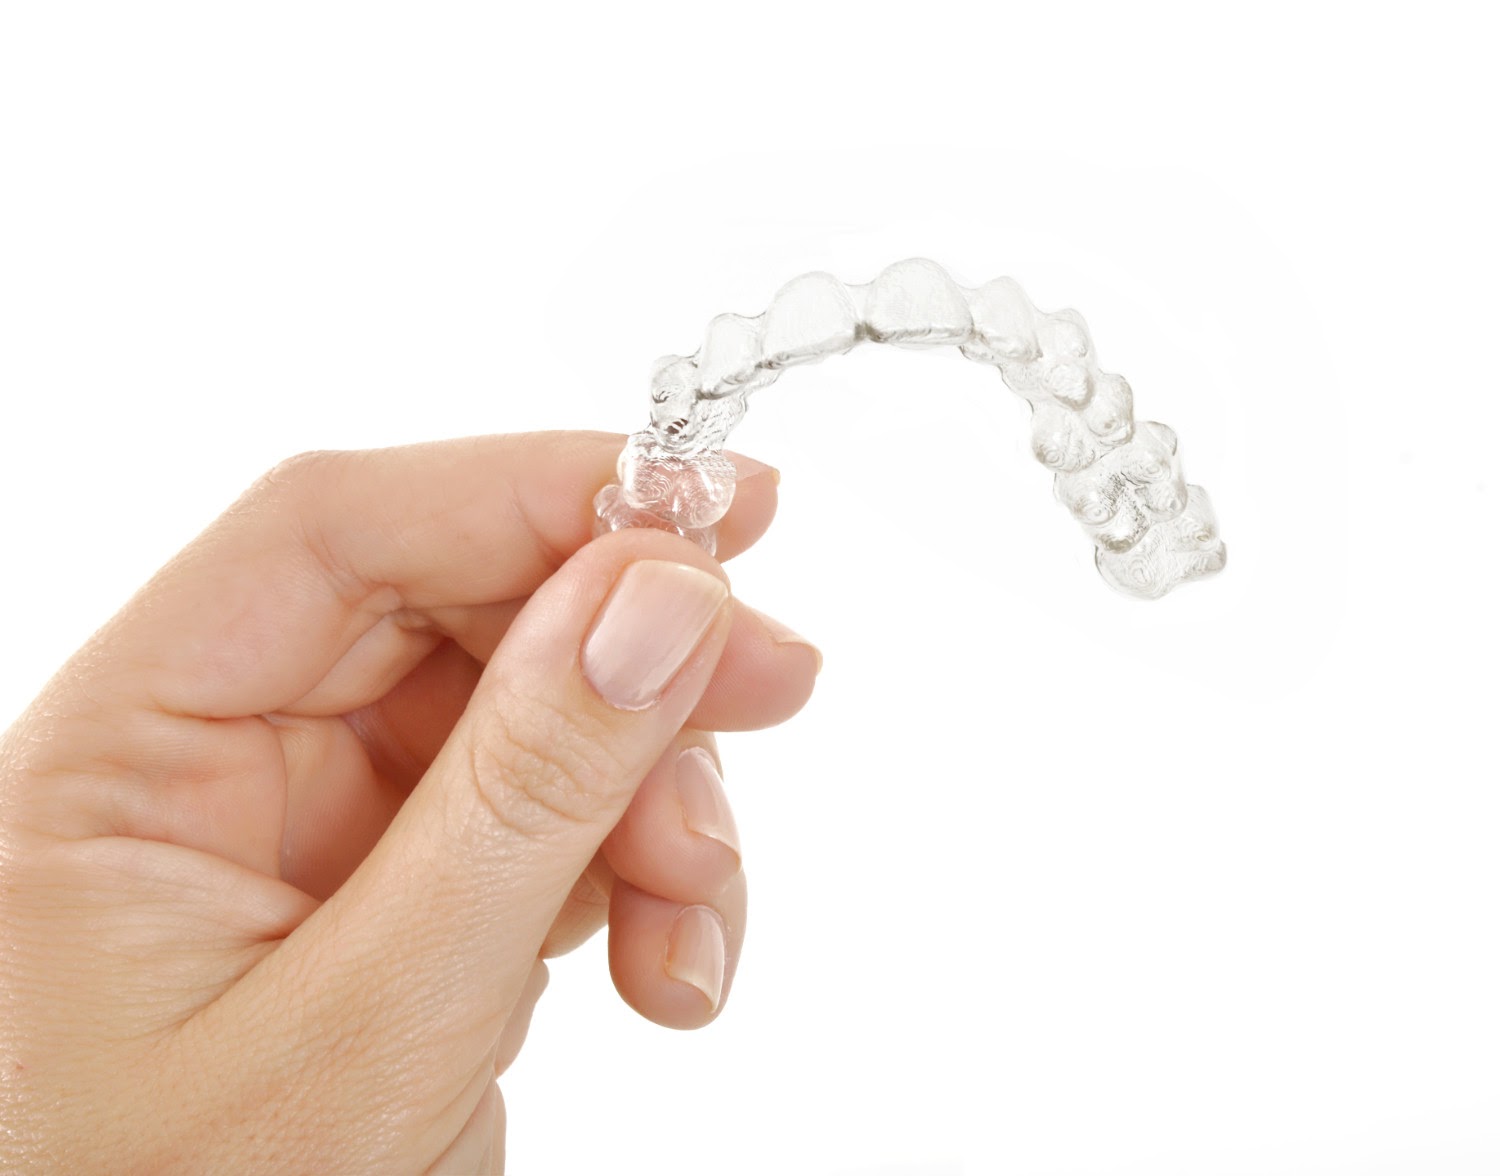 Staying Safe and Healthy with Invisalign During COVID-19